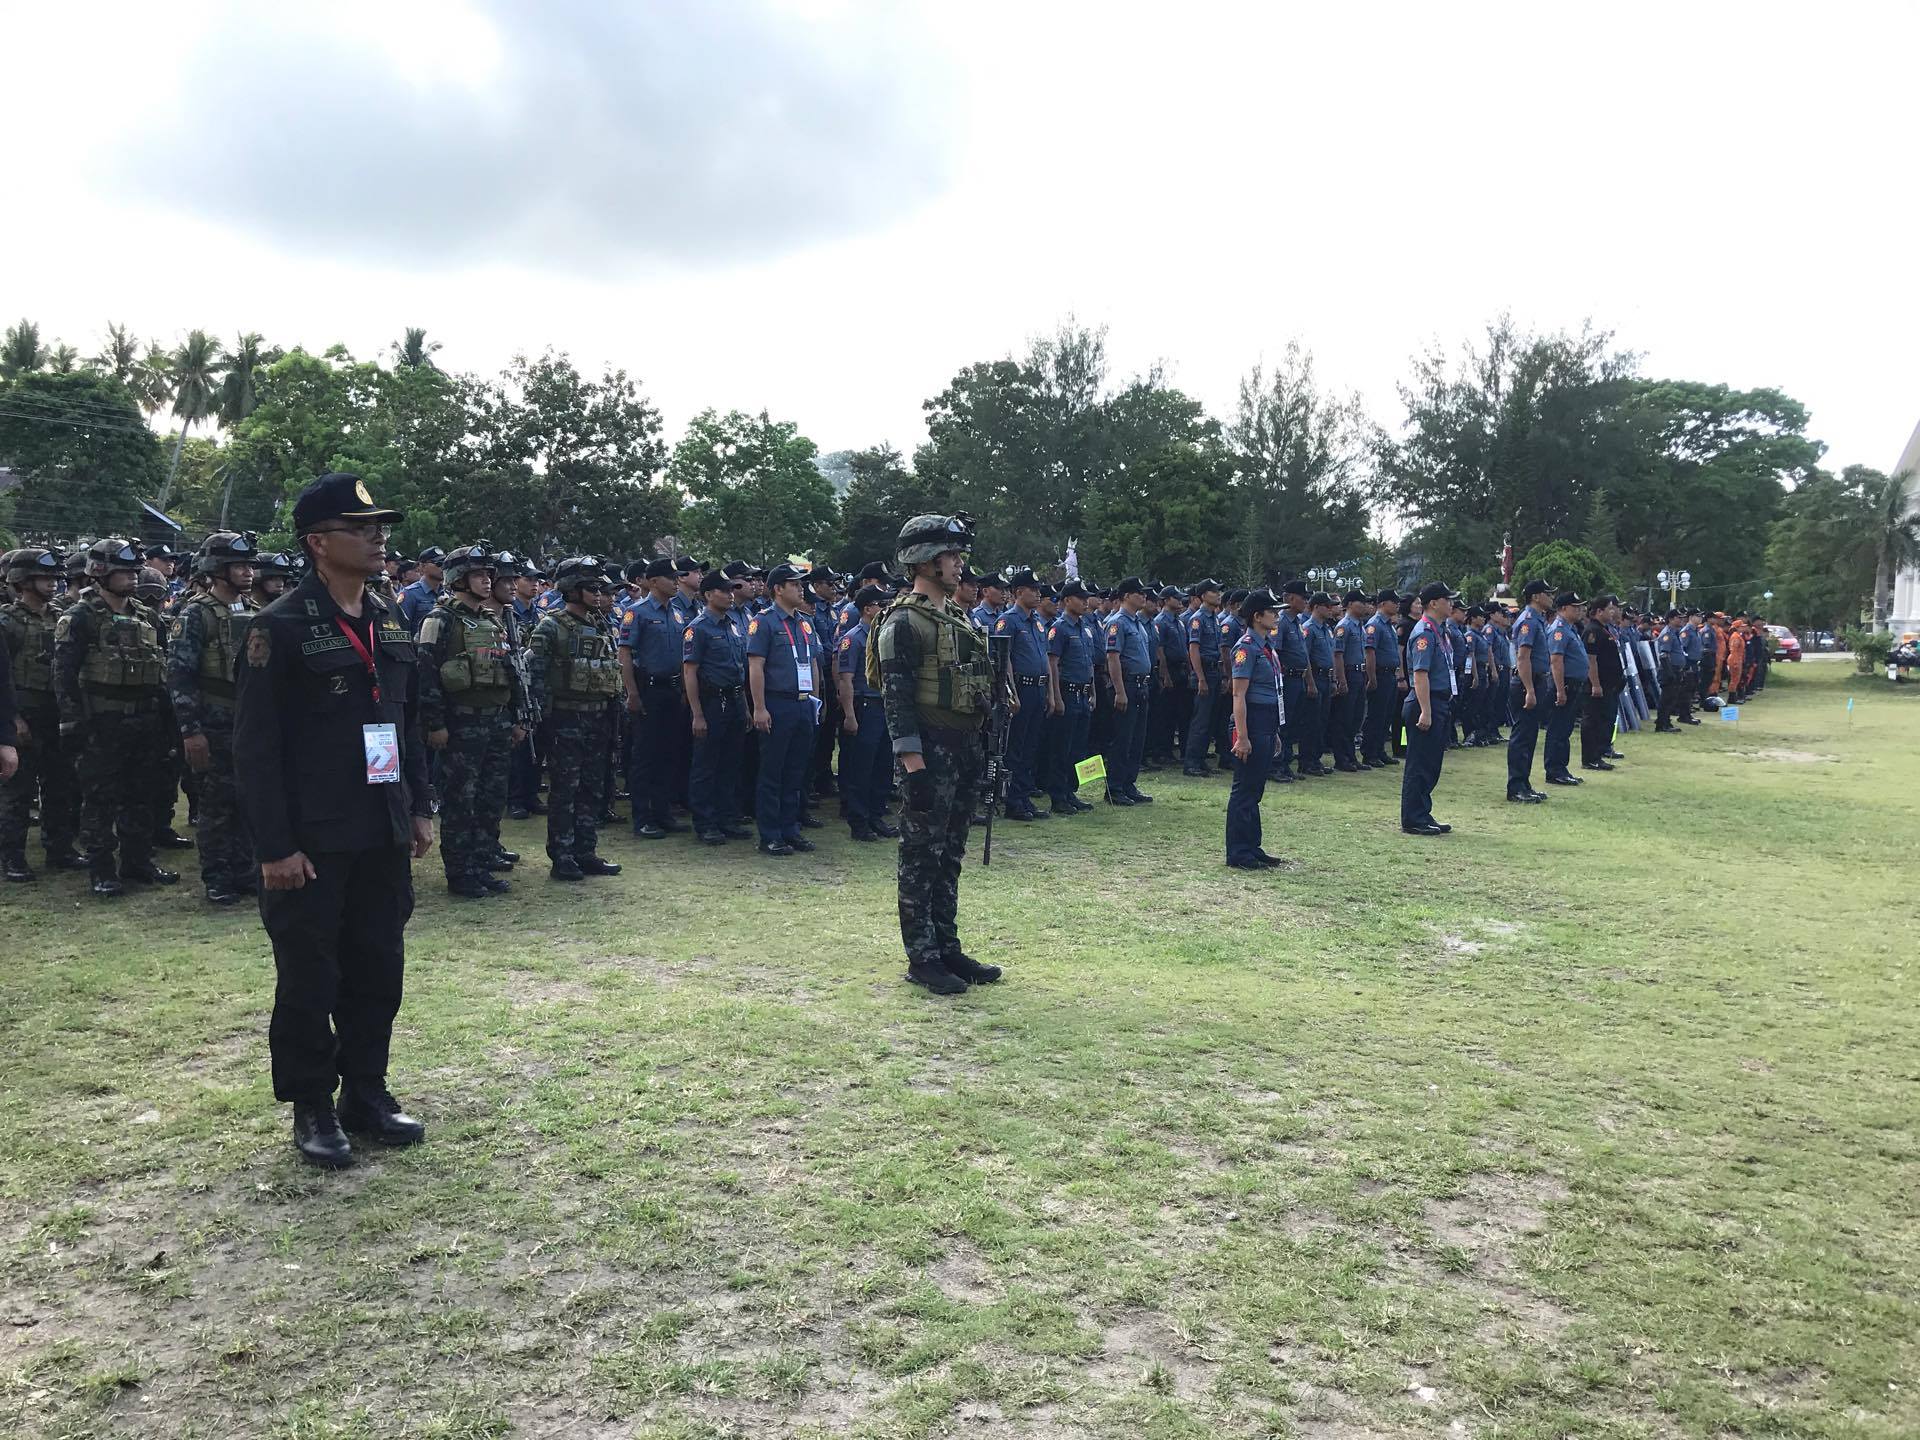 Around 3200 security forces will be deployed to secure the places of engagement,venues and routes during the conduct of ASEAN meetings in bohol from April 19-23, 2017. ( PHOTO VIA/ NESTLE SEMILLA)